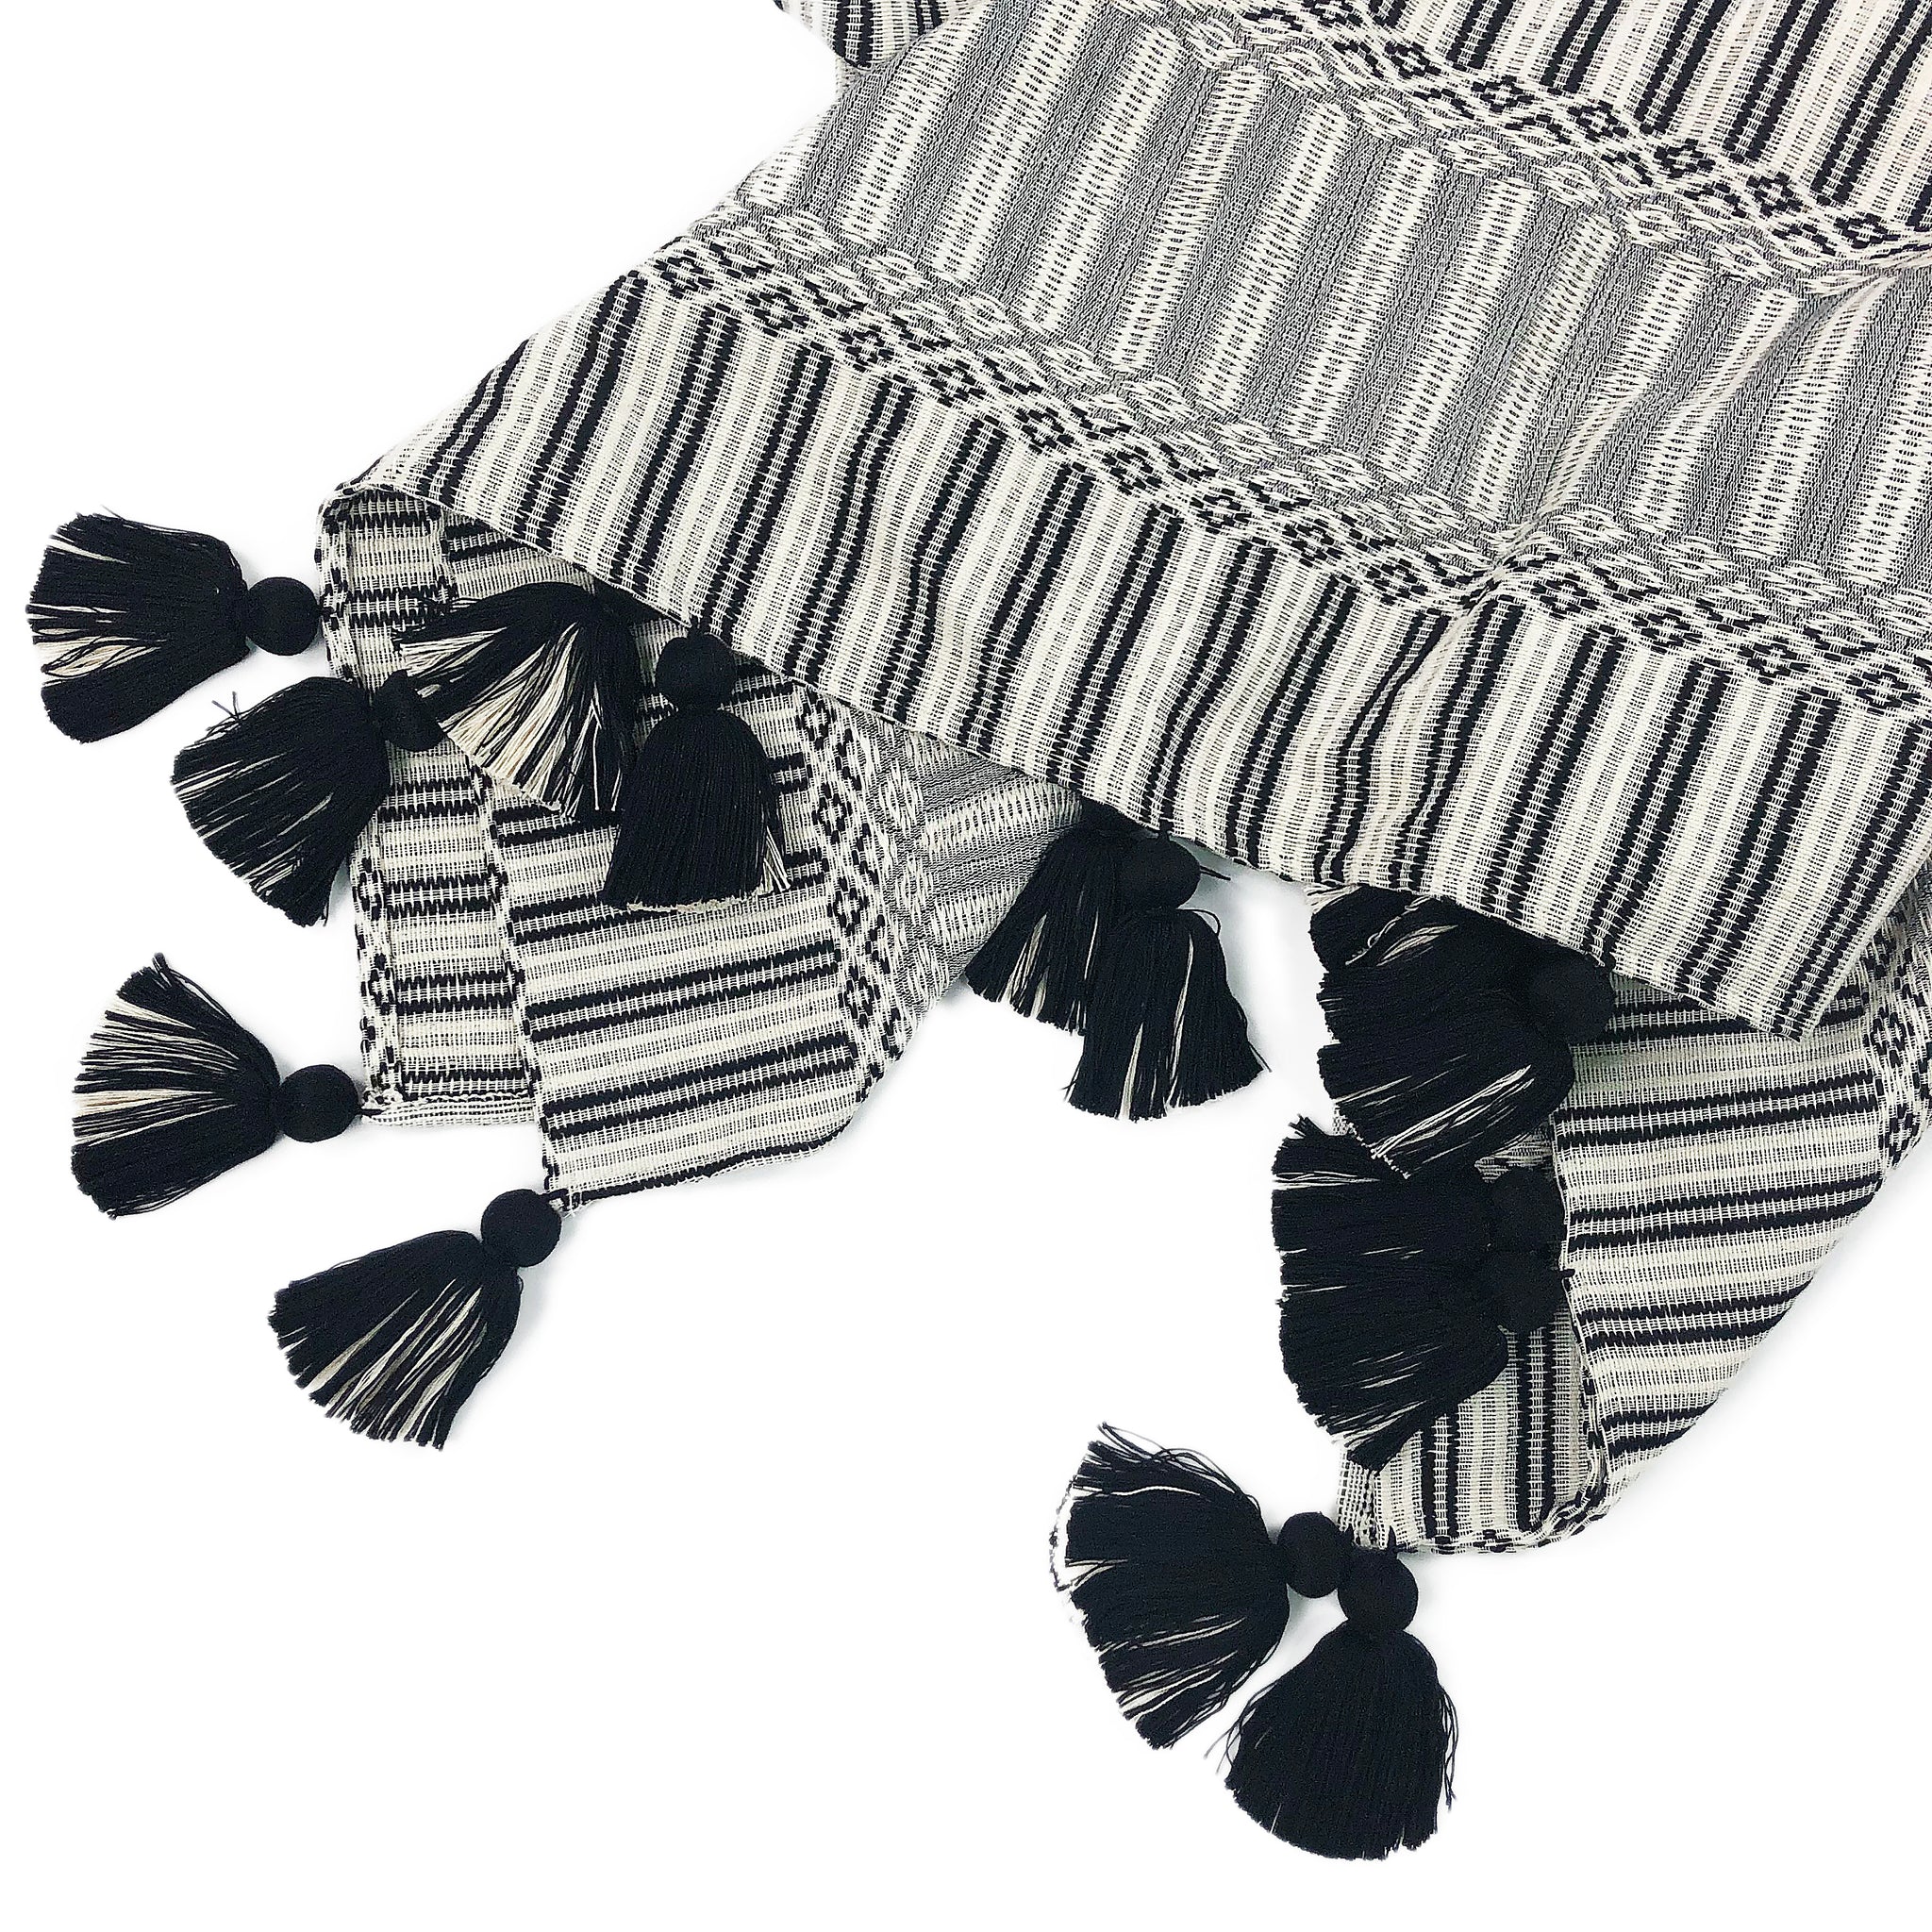 Volcanic Sands Throw by Del Palomar. Handmade in Guatemala. Handwoven authentic Guatemalan fabric throw, featuring an intricately woven textured pattern and adorned with black and white tassels. Handwoven on a traditional footloom by local artisans in Chimaltenango, Guatemala. Color black and white. 100% cotton.